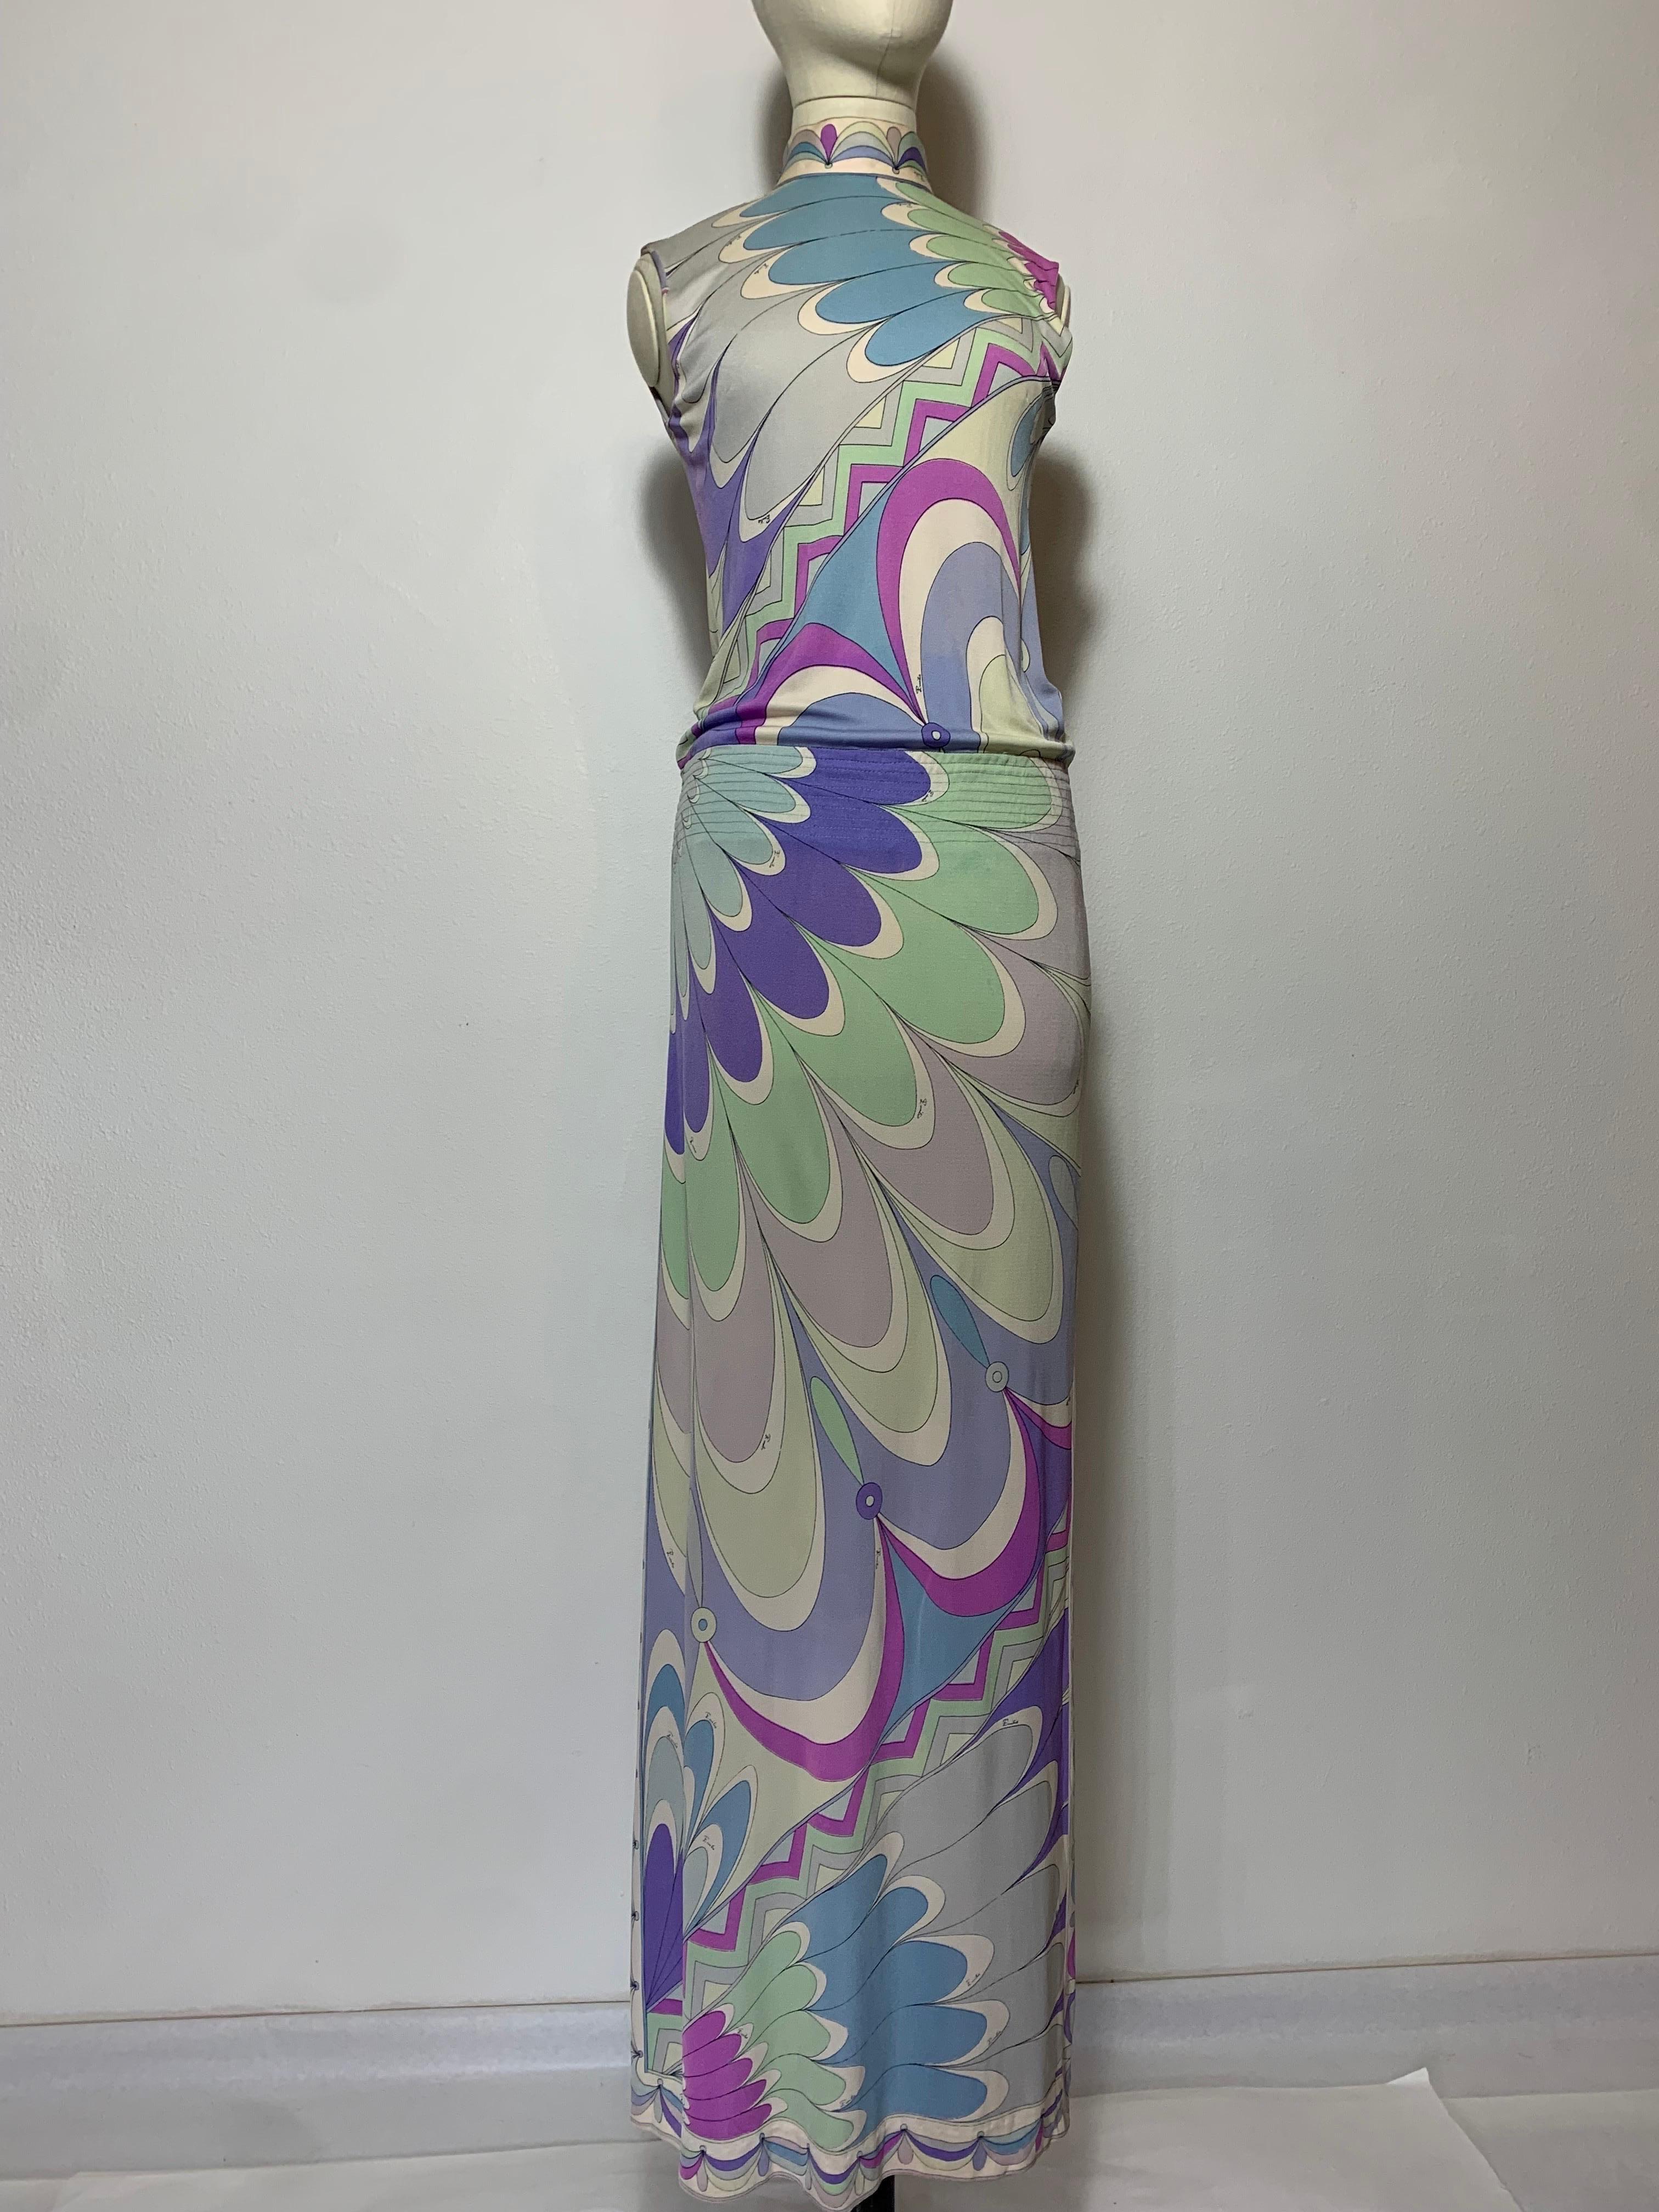 1960s Emilio Pucci Silk Jersey Pastel Print Maxi Dress w Fitted Hip & Blouson Waist: Classic Pucci print in pastel purple, lavender, dove gray and pistachio feather fans. Wide concentric-stitched band waist is fitted at hip to form a blouson waist.